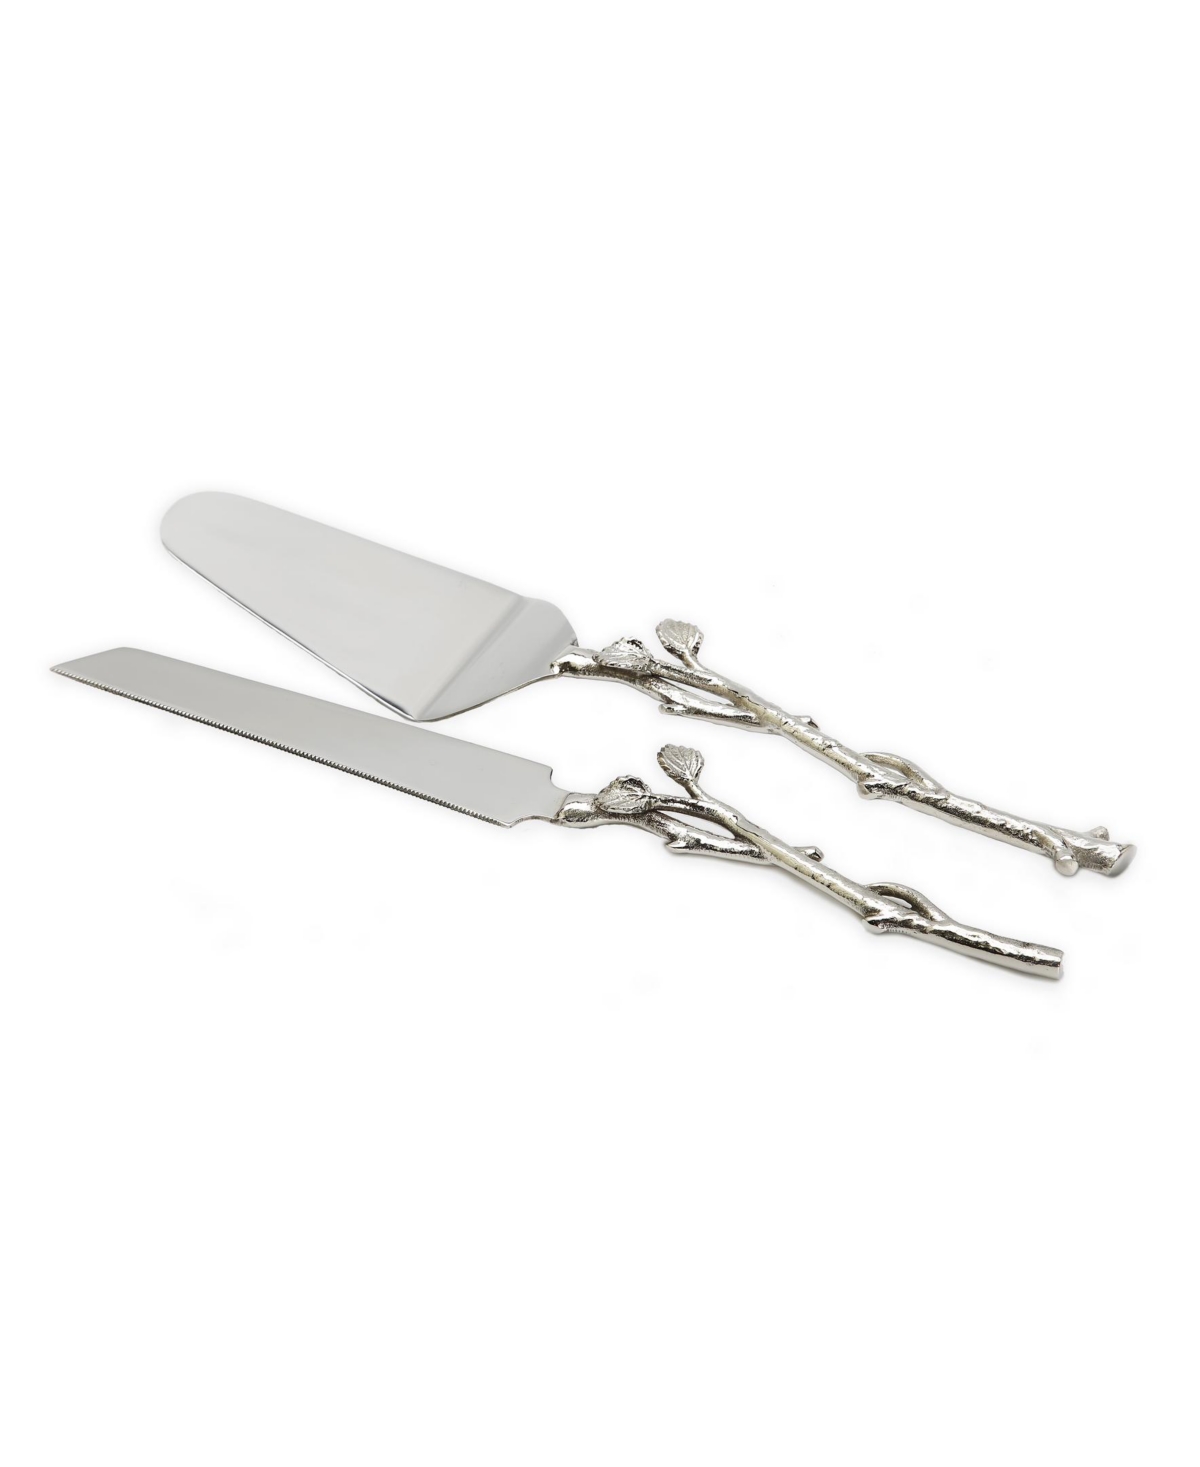 Classic Touch Cake Server And Knife Set With Leaf Design In Silver-tone